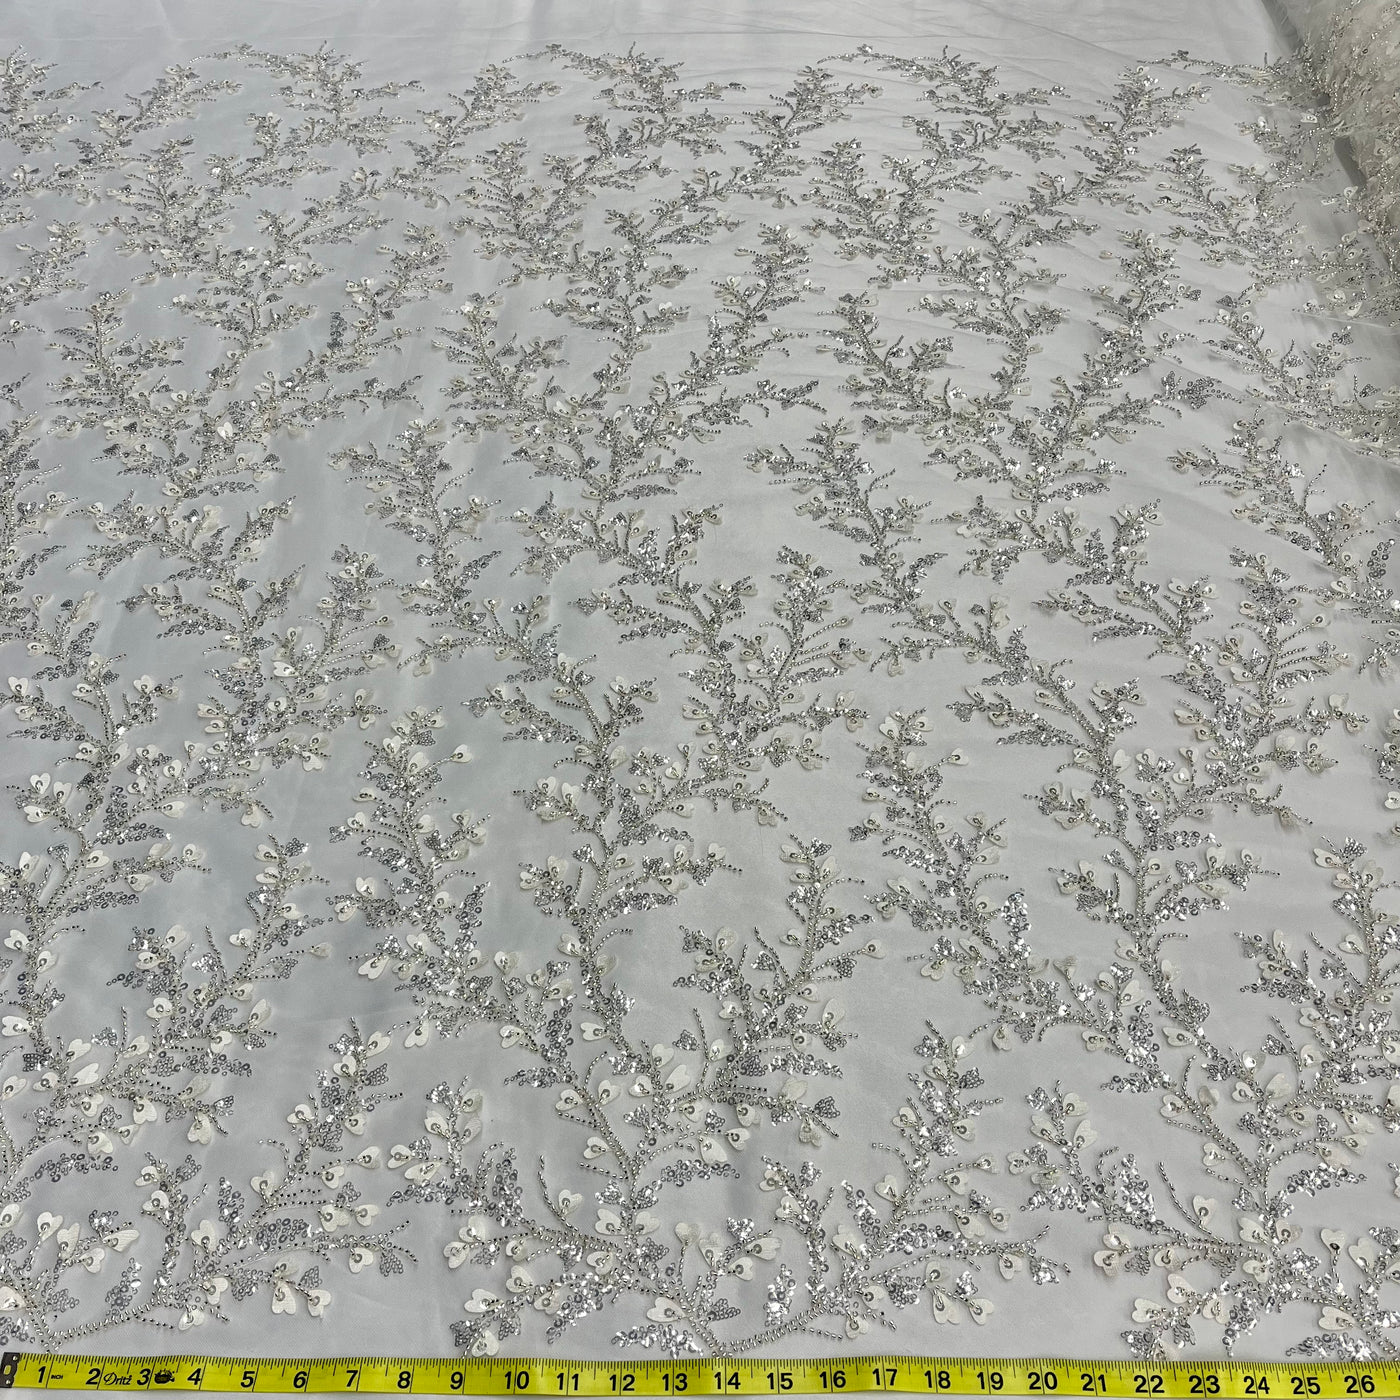 Beaded 3D Floral Lace Fabric Embroidered on 100% Polyester Net Mesh | Lace USA - GD-70